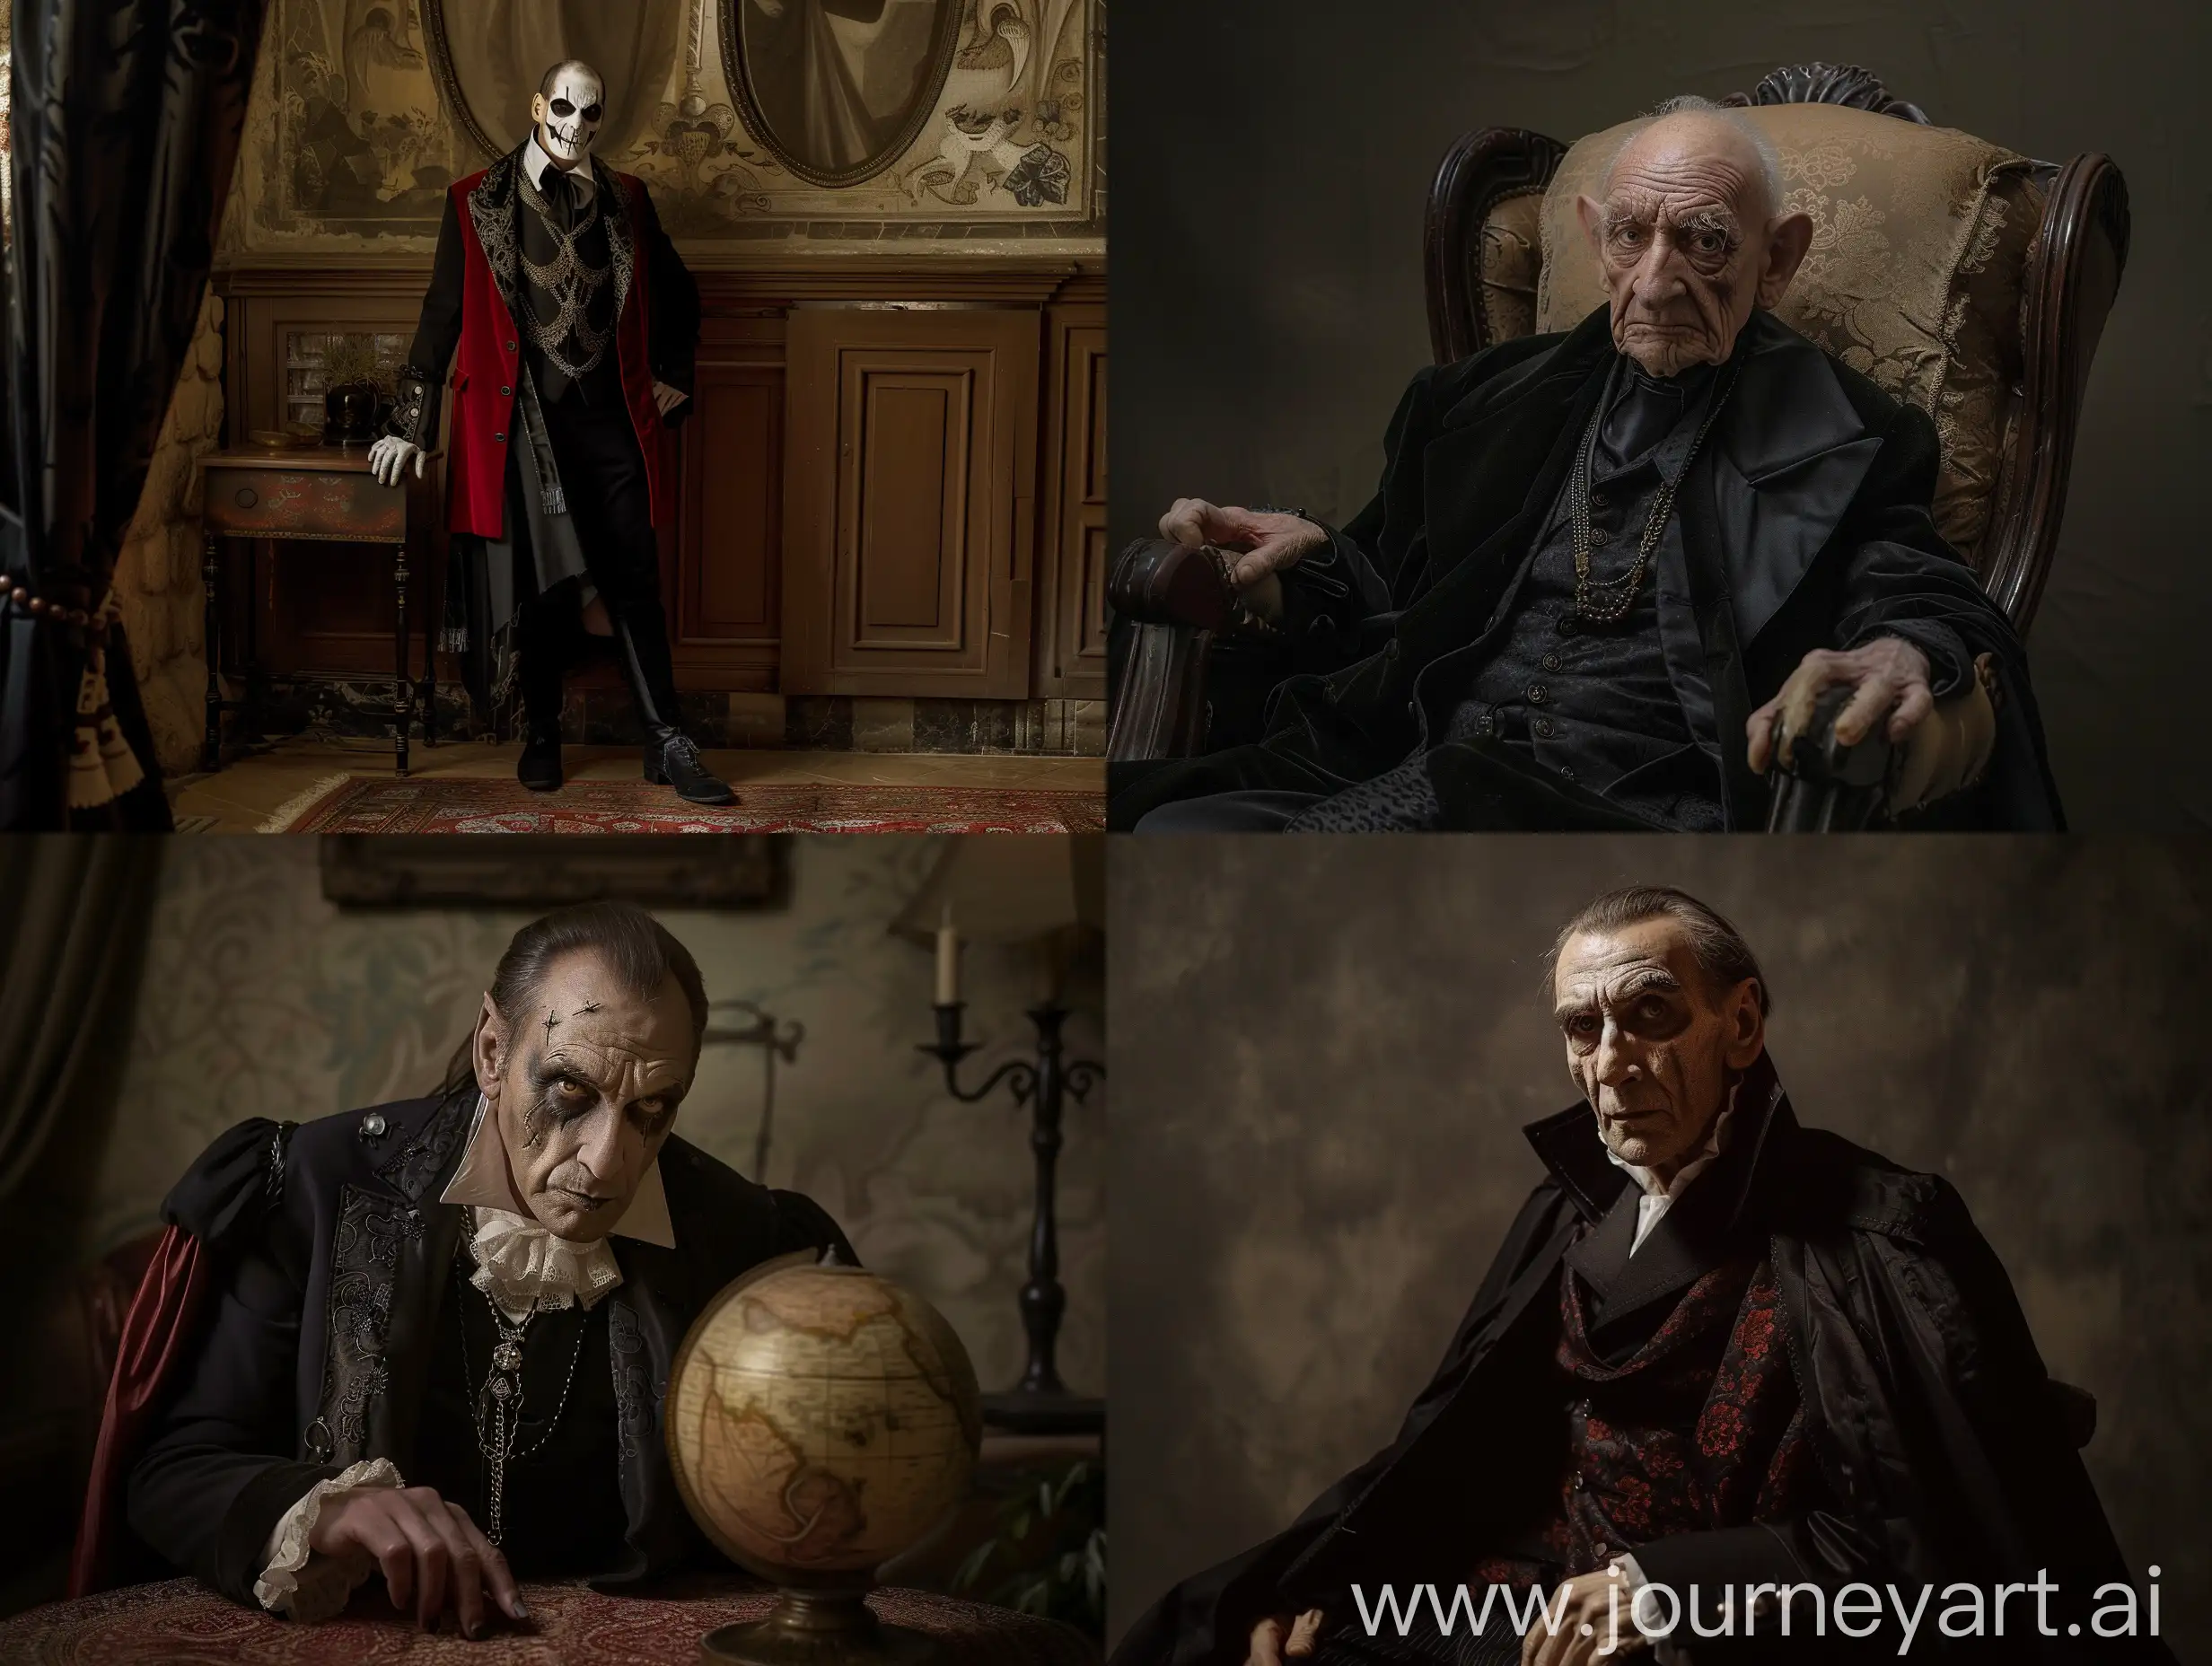 Count Orlok is visiting Barcelona with his suite, a professional photo, studio lighting